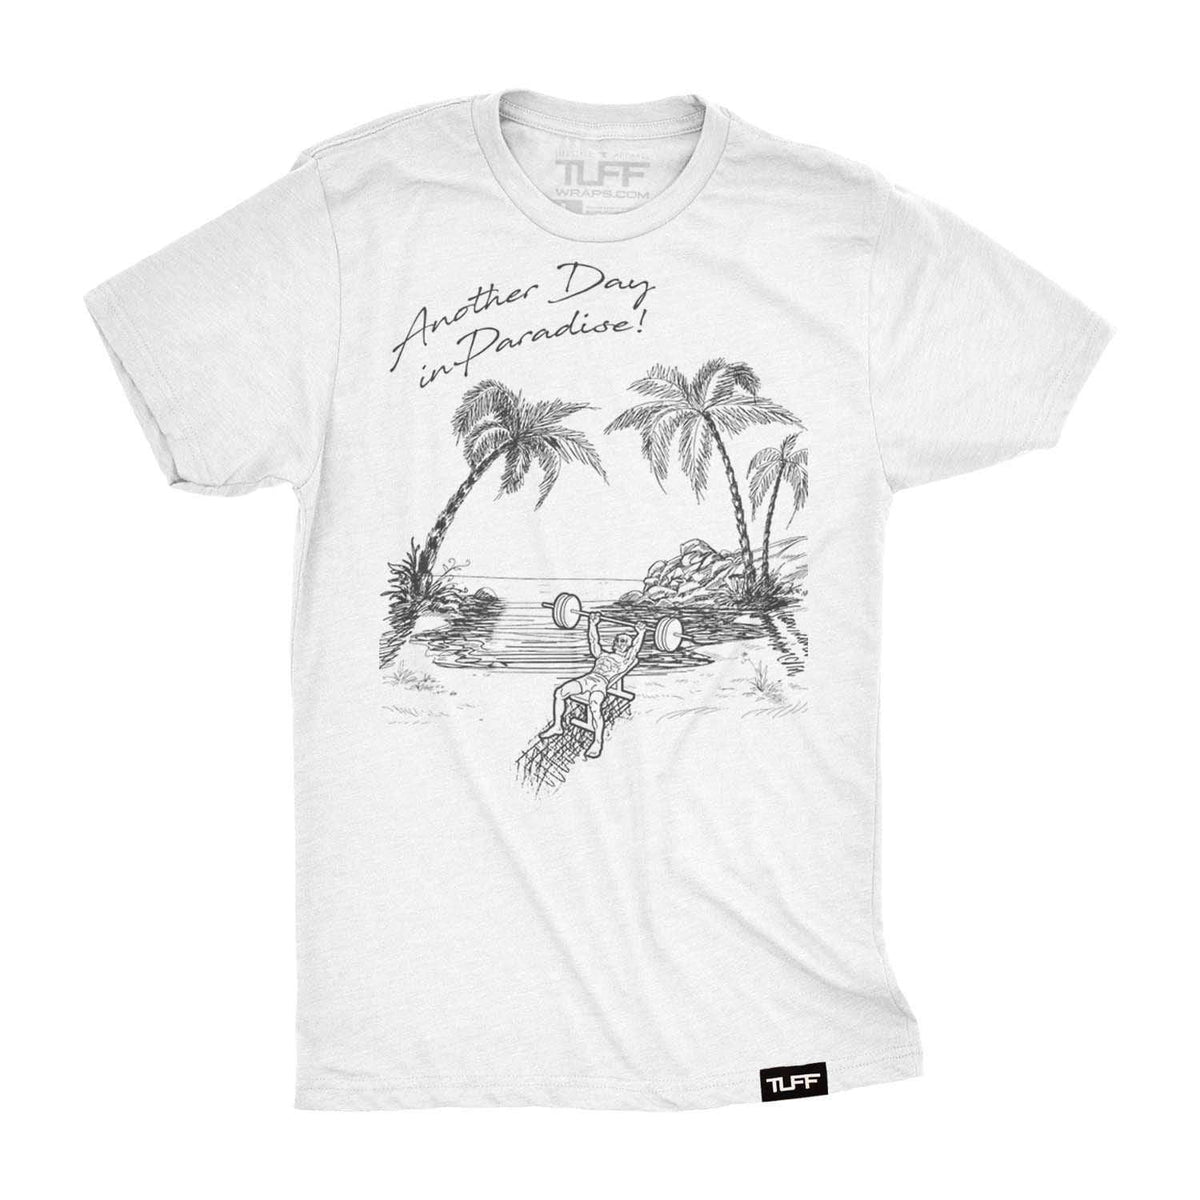 Another Day in Paradise Tee S / White TuffWraps.com